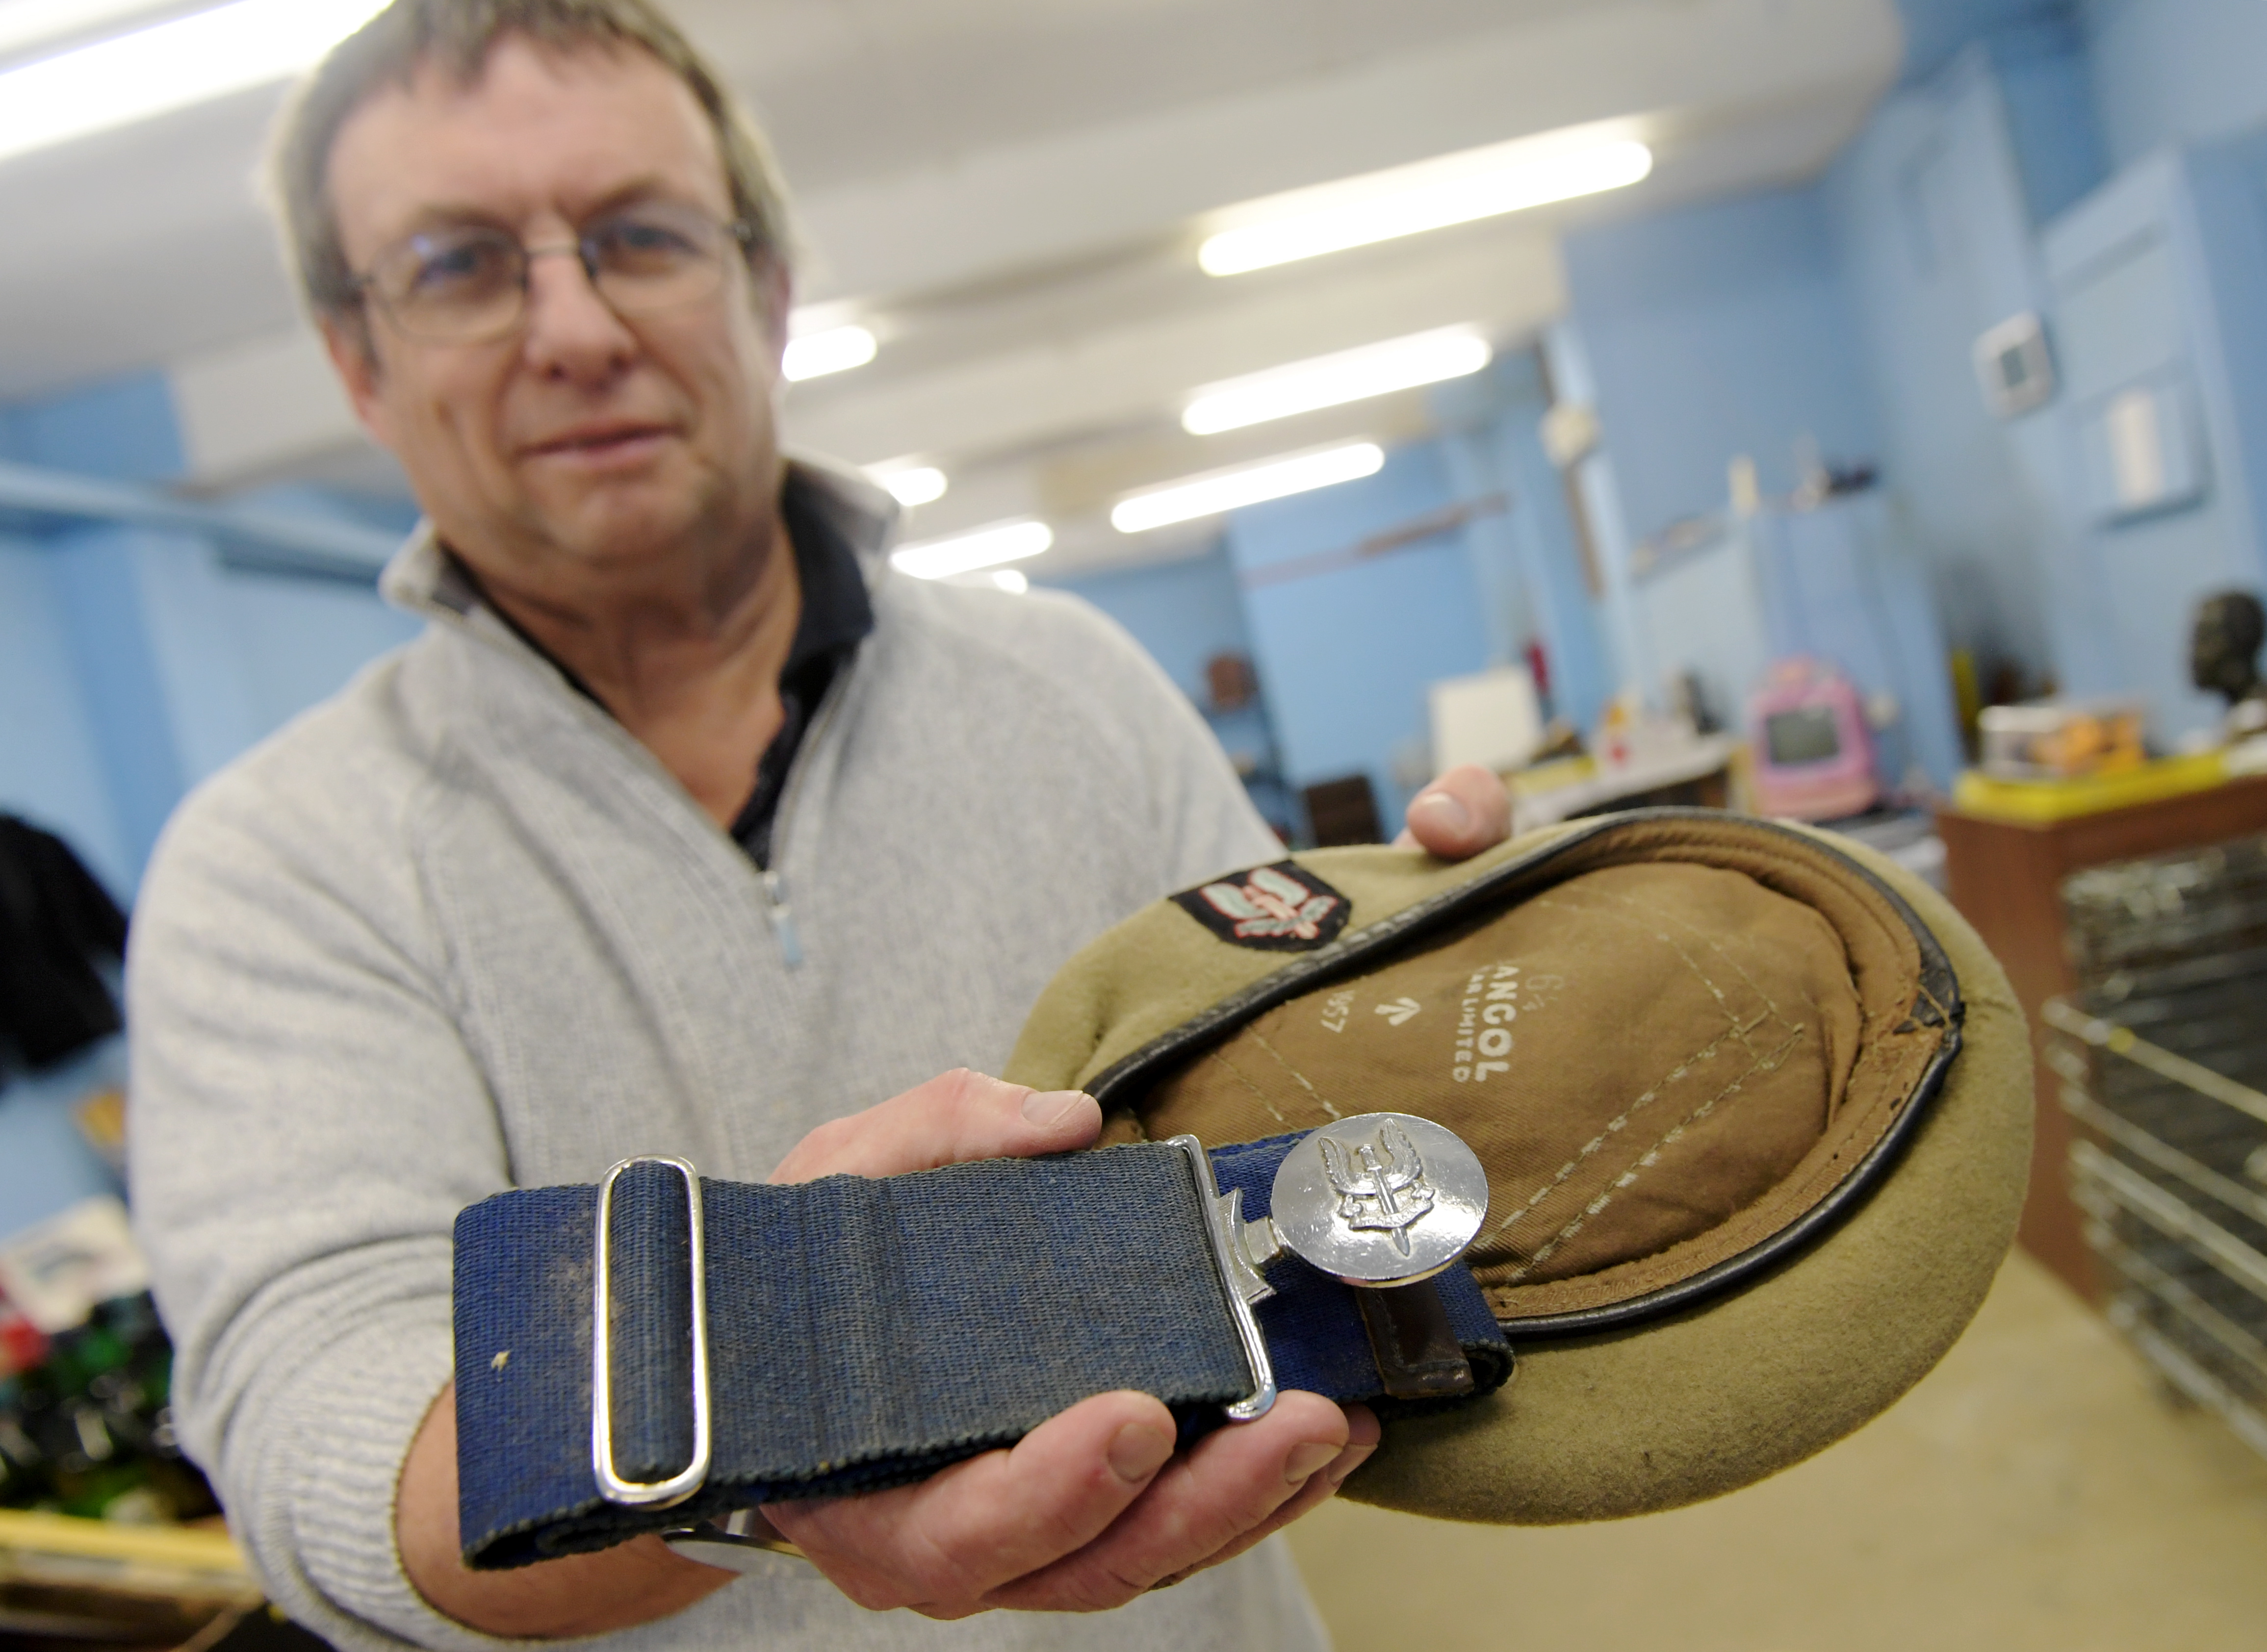 Inverbervie auctioneer Dave Smith pictured with the rare soldier's belt and hat that he has found. 

Picture by KATH FLANNERY